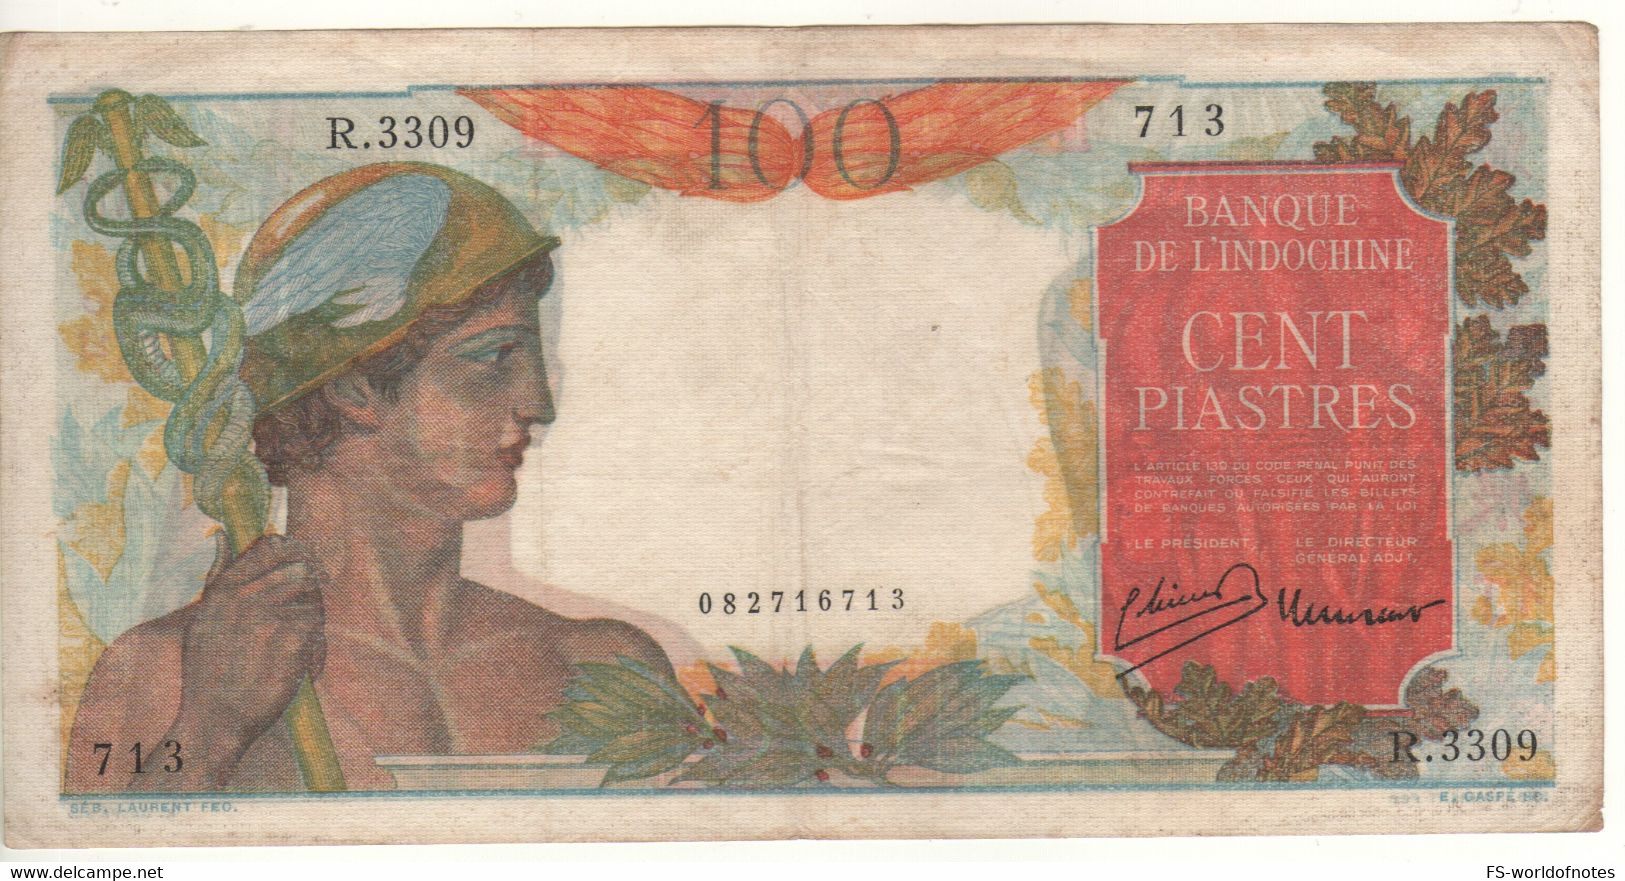 FRENCH INDOCHINA   100  Piastres  / Đồng / Riels / Kip    P82b   ( Mercury At Front + Elephants At Back ) - Indochina